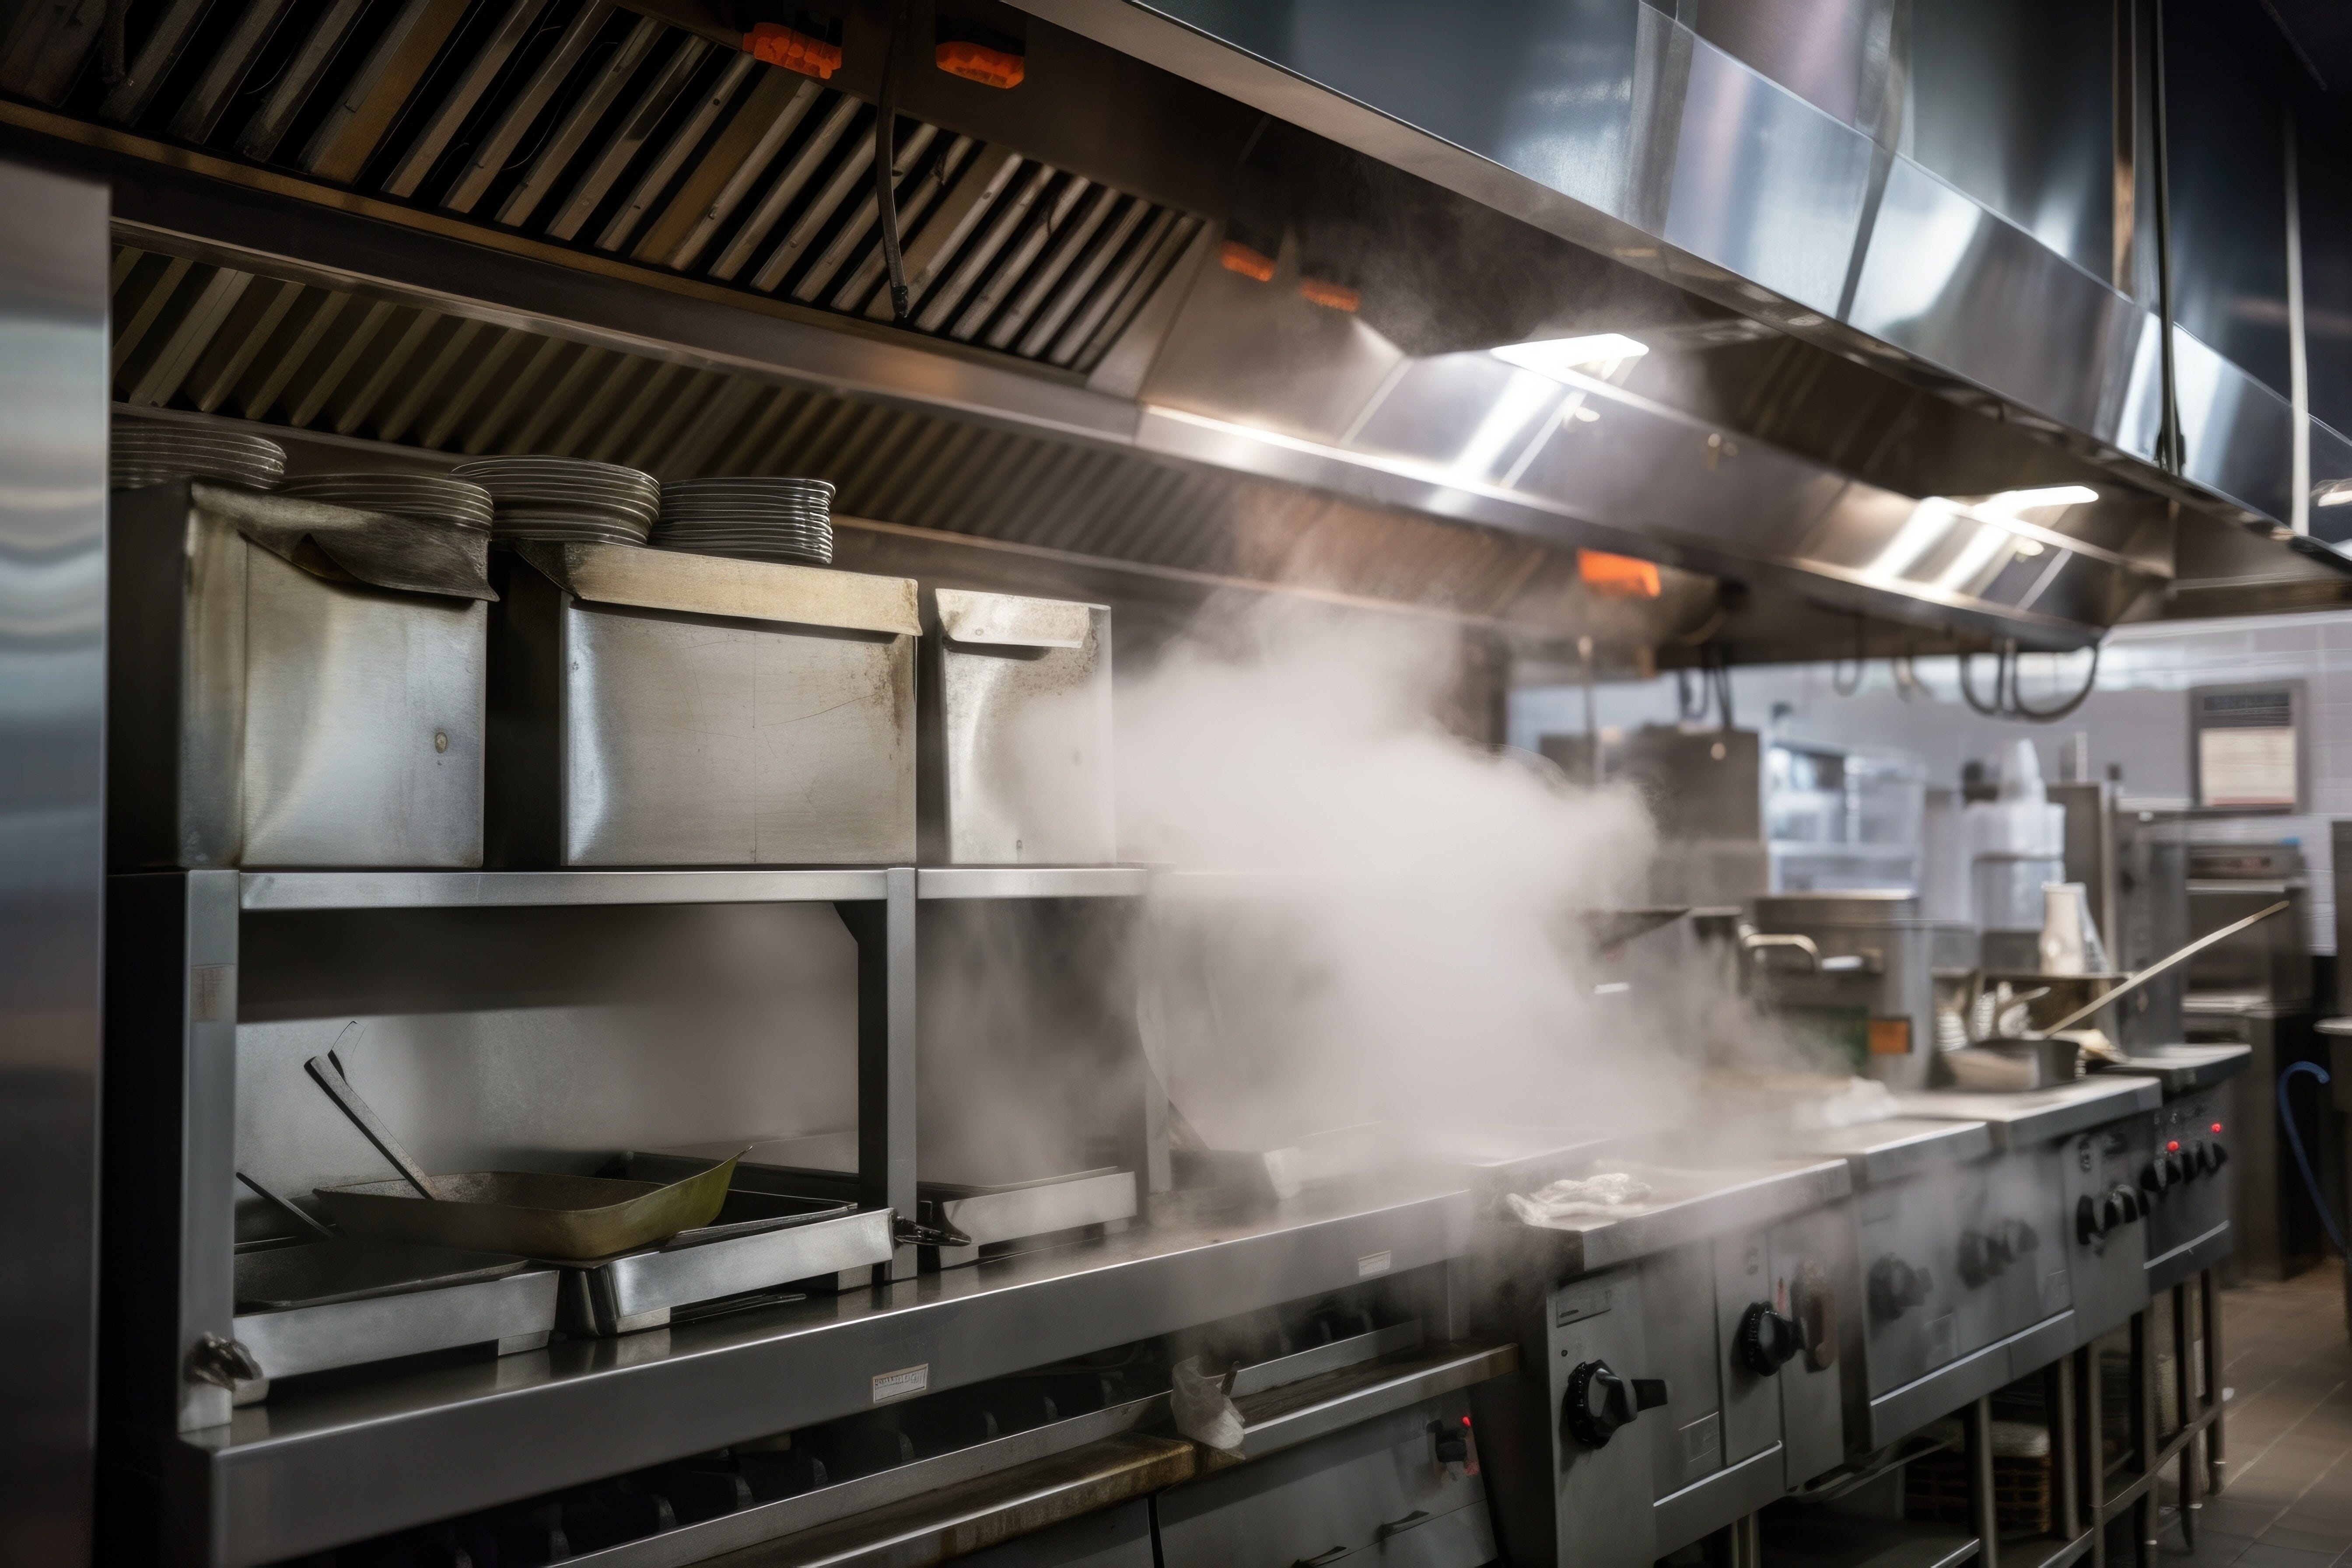 Part 1: An Introduction to Type 1 Kitchen Exhaust Hoods